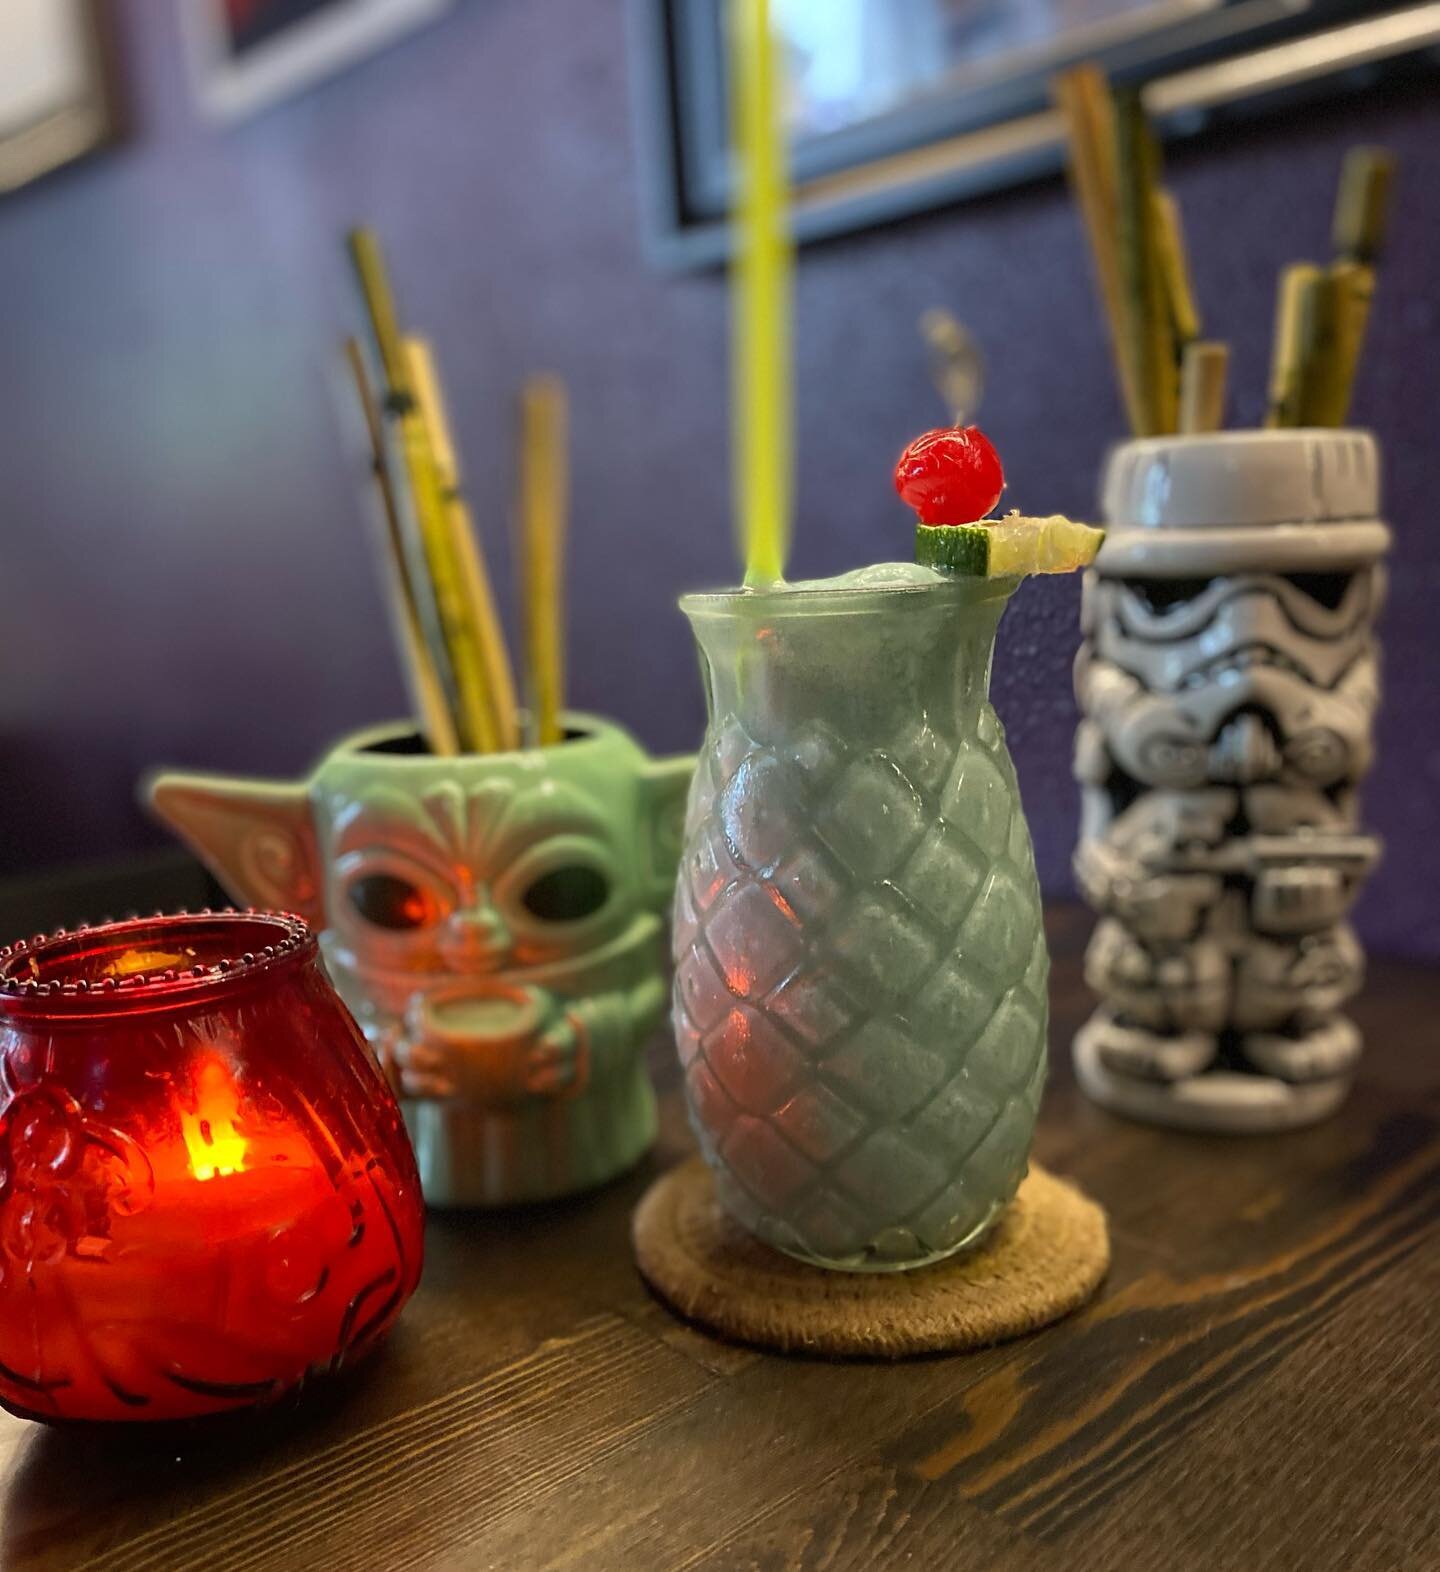 Tatooine Pi&ntilde;a Colada! Grogu and Storm Trooper approved! Available tonight at NiteOwl! #maythe4thbewithyou 🦉 
.
.
737 Main St. Unit F. (8th &amp; Main) 
Open Tue-Sat 5pm to LastCall &amp; (Closed Sunday &amp; Monday)
.
.
#NiteOwlBar #tropicald